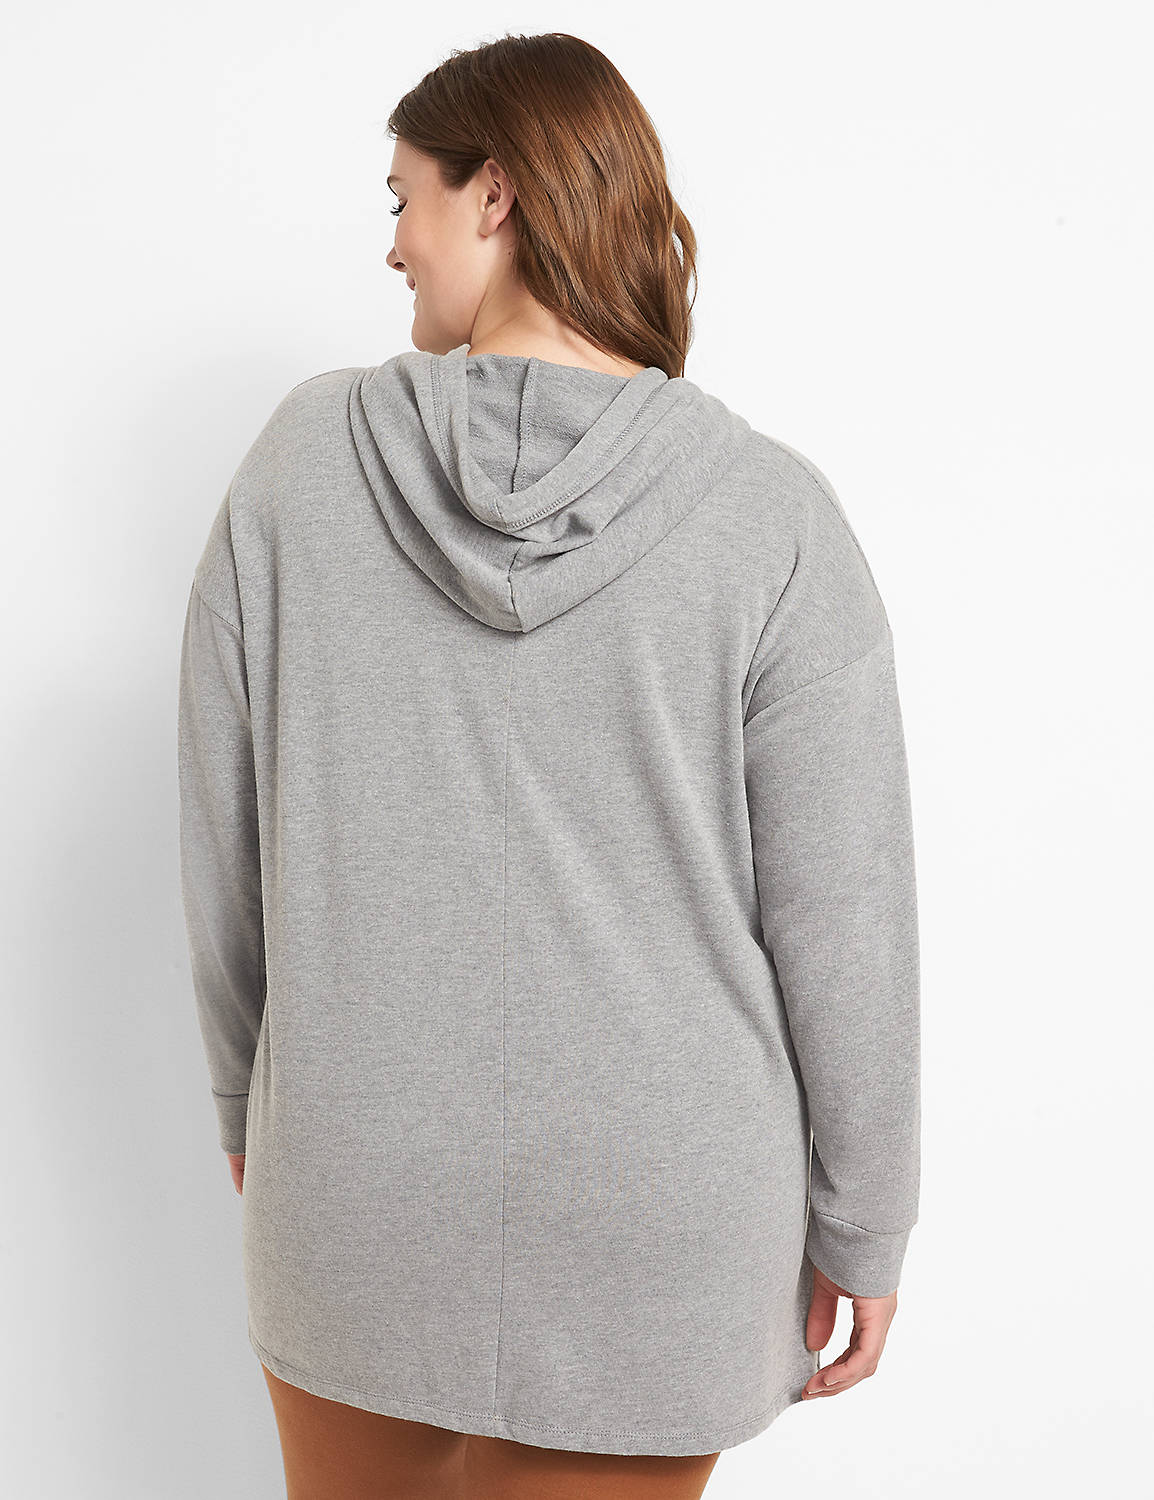 Long Sleeve Drop Shoulder Hoodie Tunic Graphic: Stand For 1125520:BTC30 Medium Heather Gray:10/12 Product Image 2